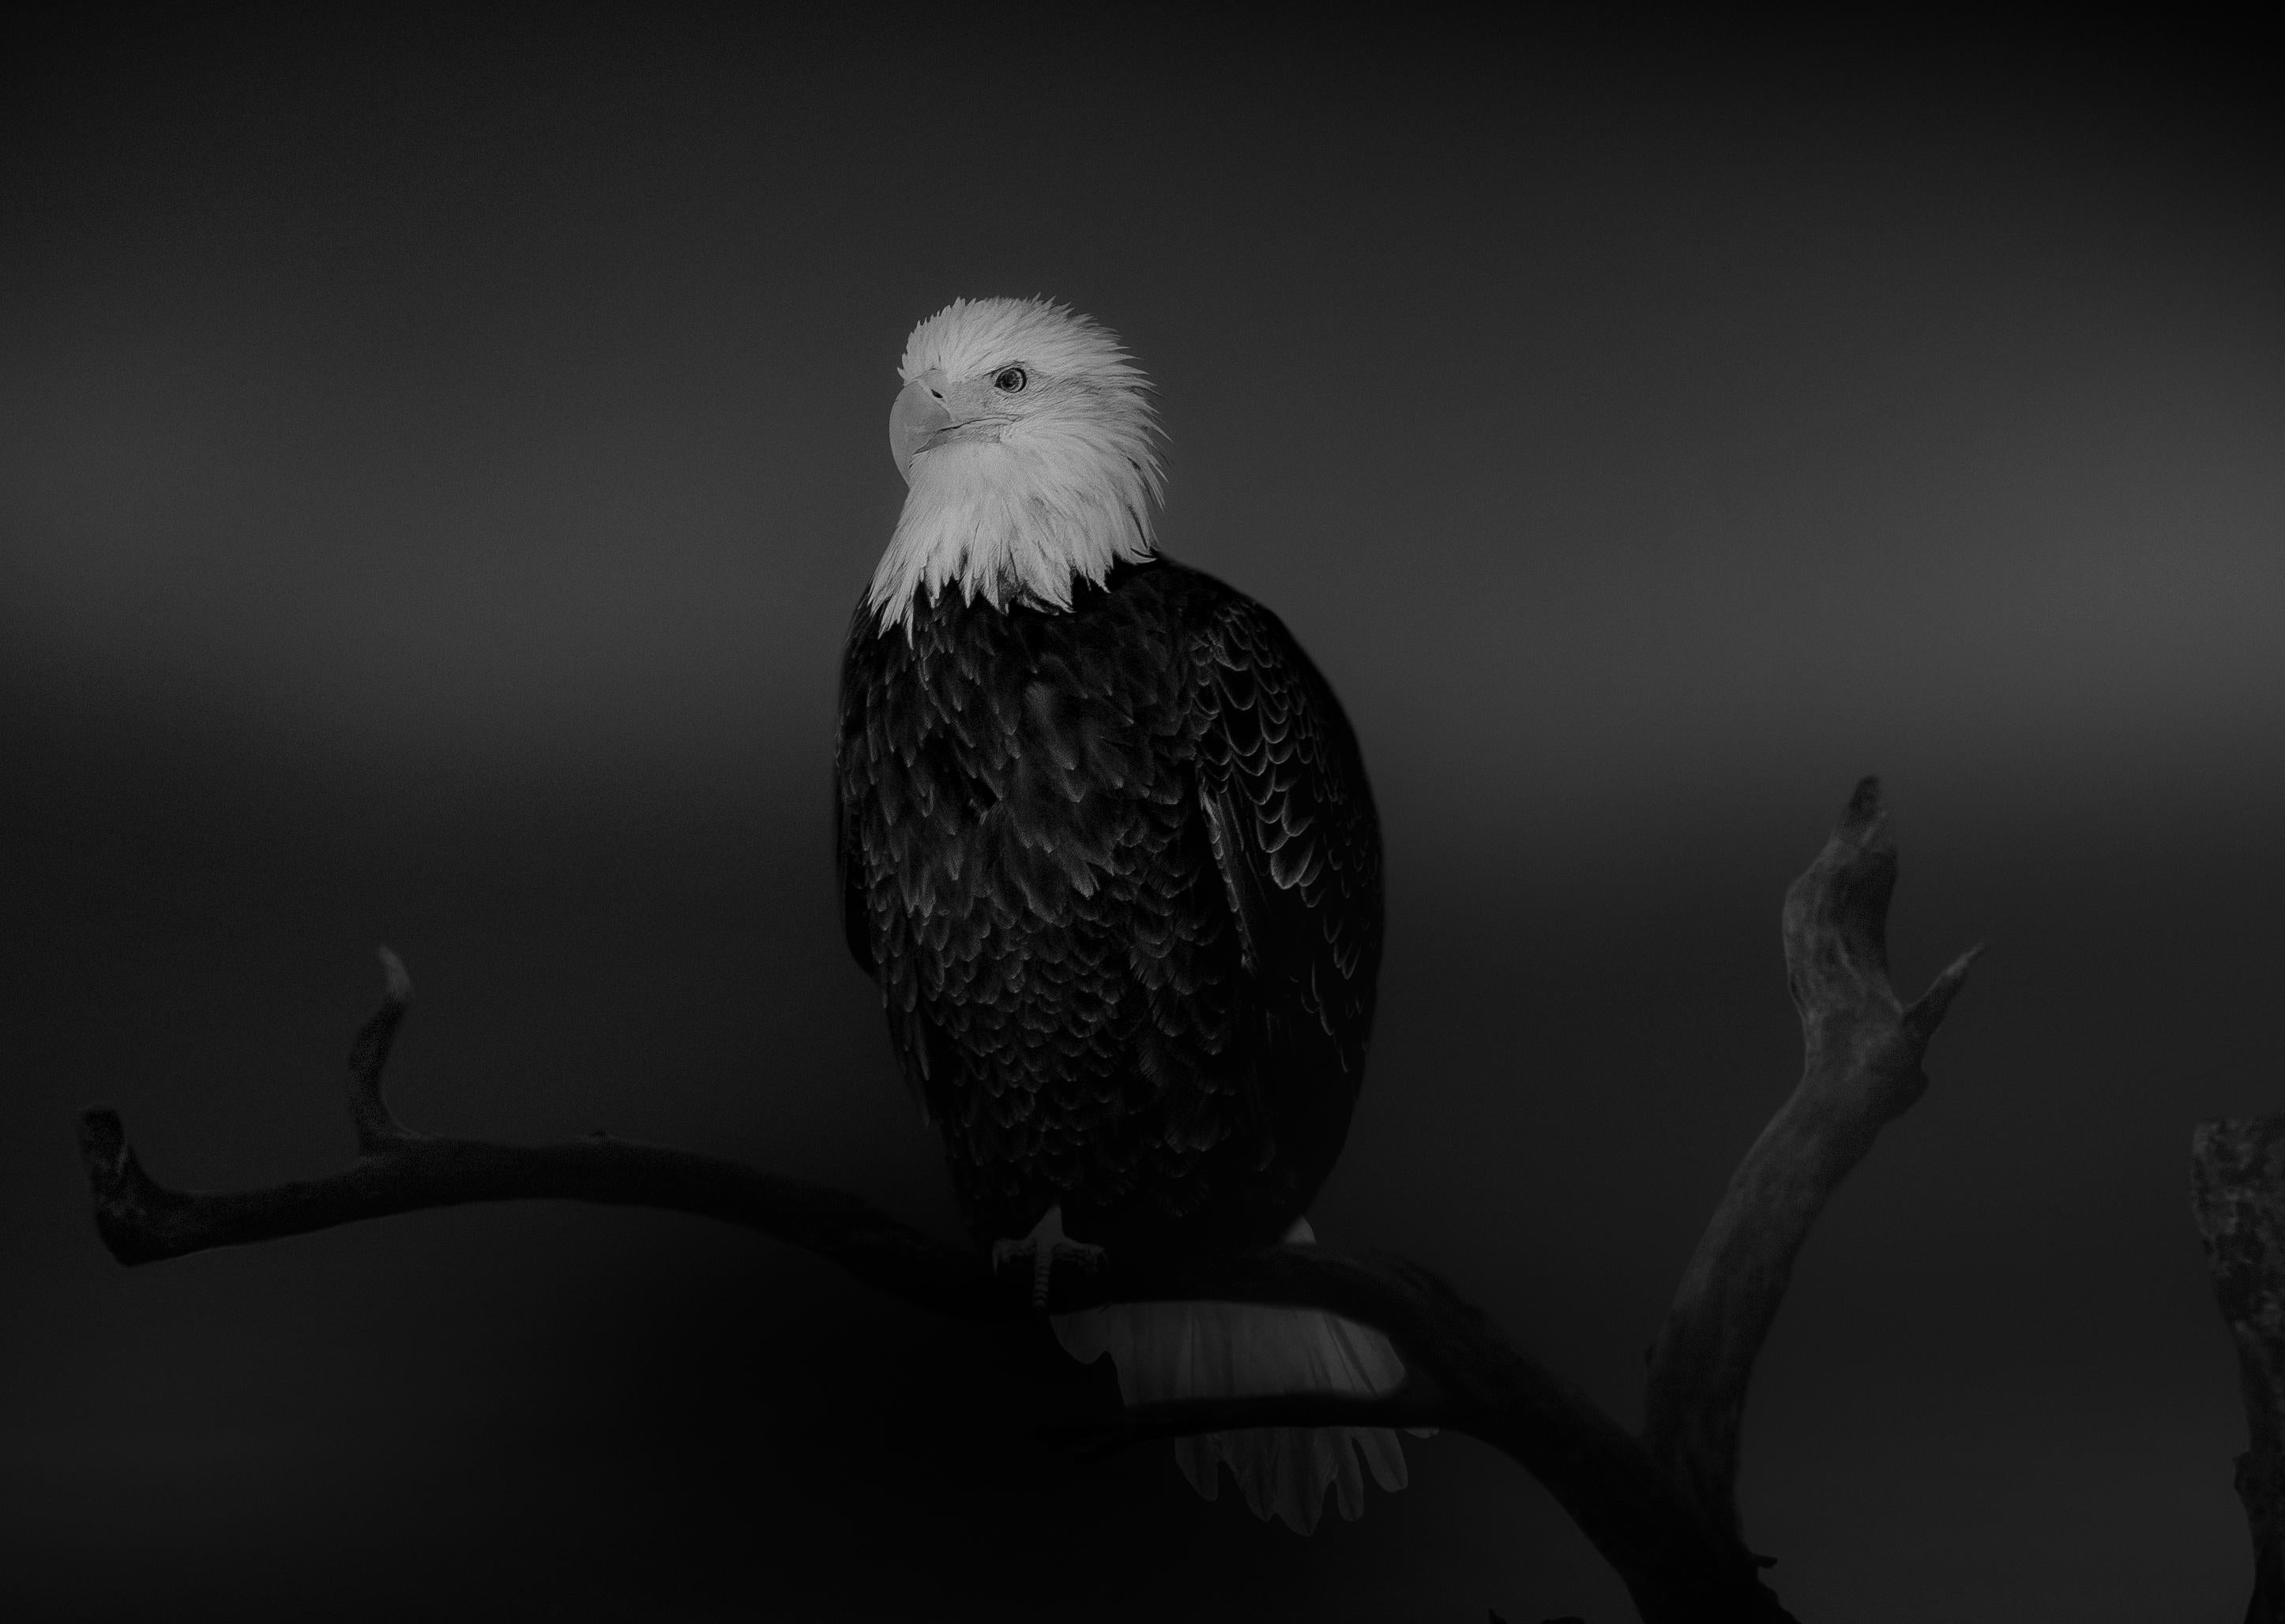 Shane Russeck Black and White Photograph - "Bald Eagle" 50x60 - Black & White Photography, Photograph Fine Art Print